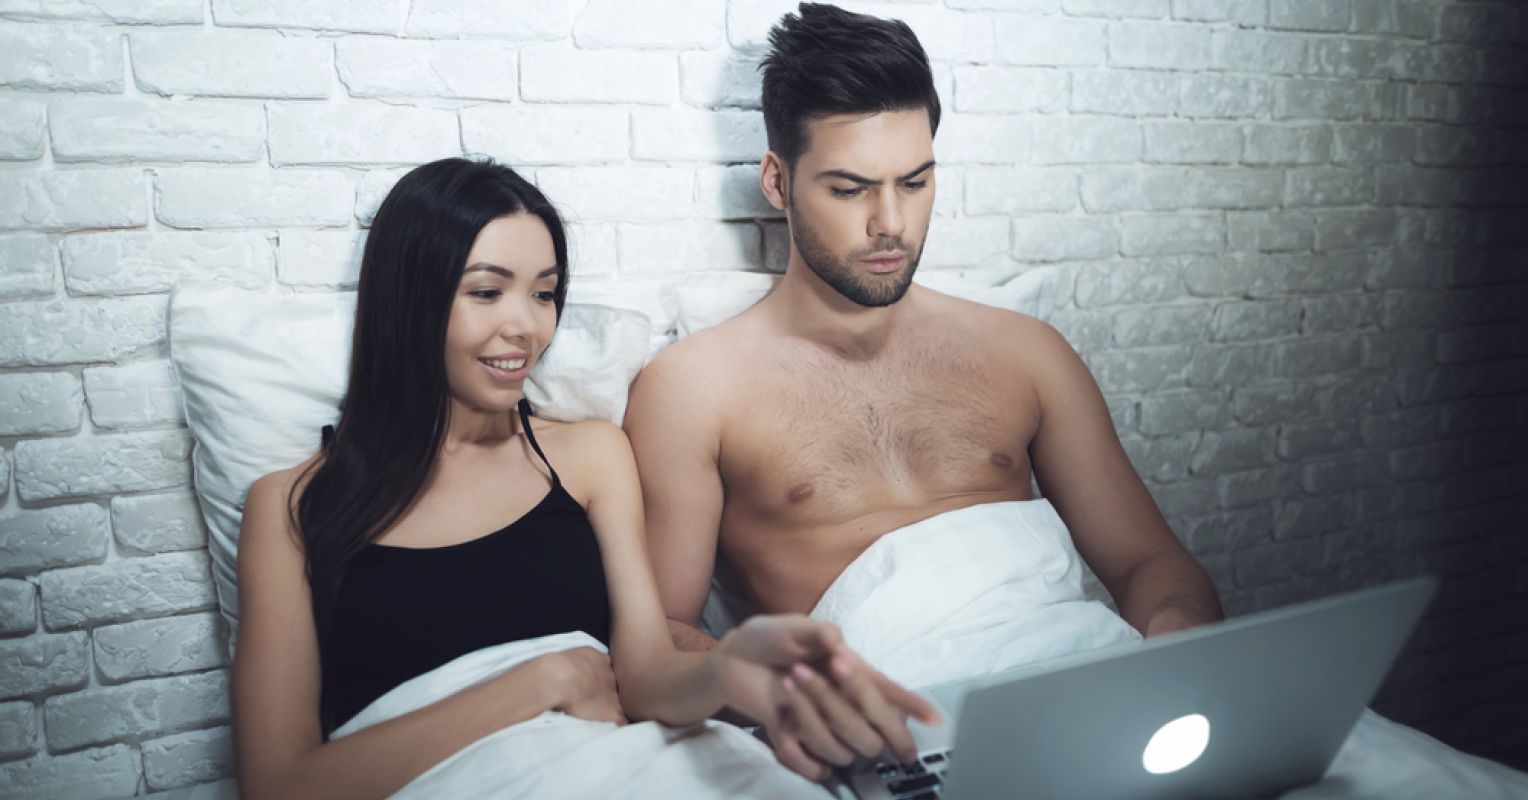 Is Watching Pornography a Form of Cheating? It Depends Psychology Today pic